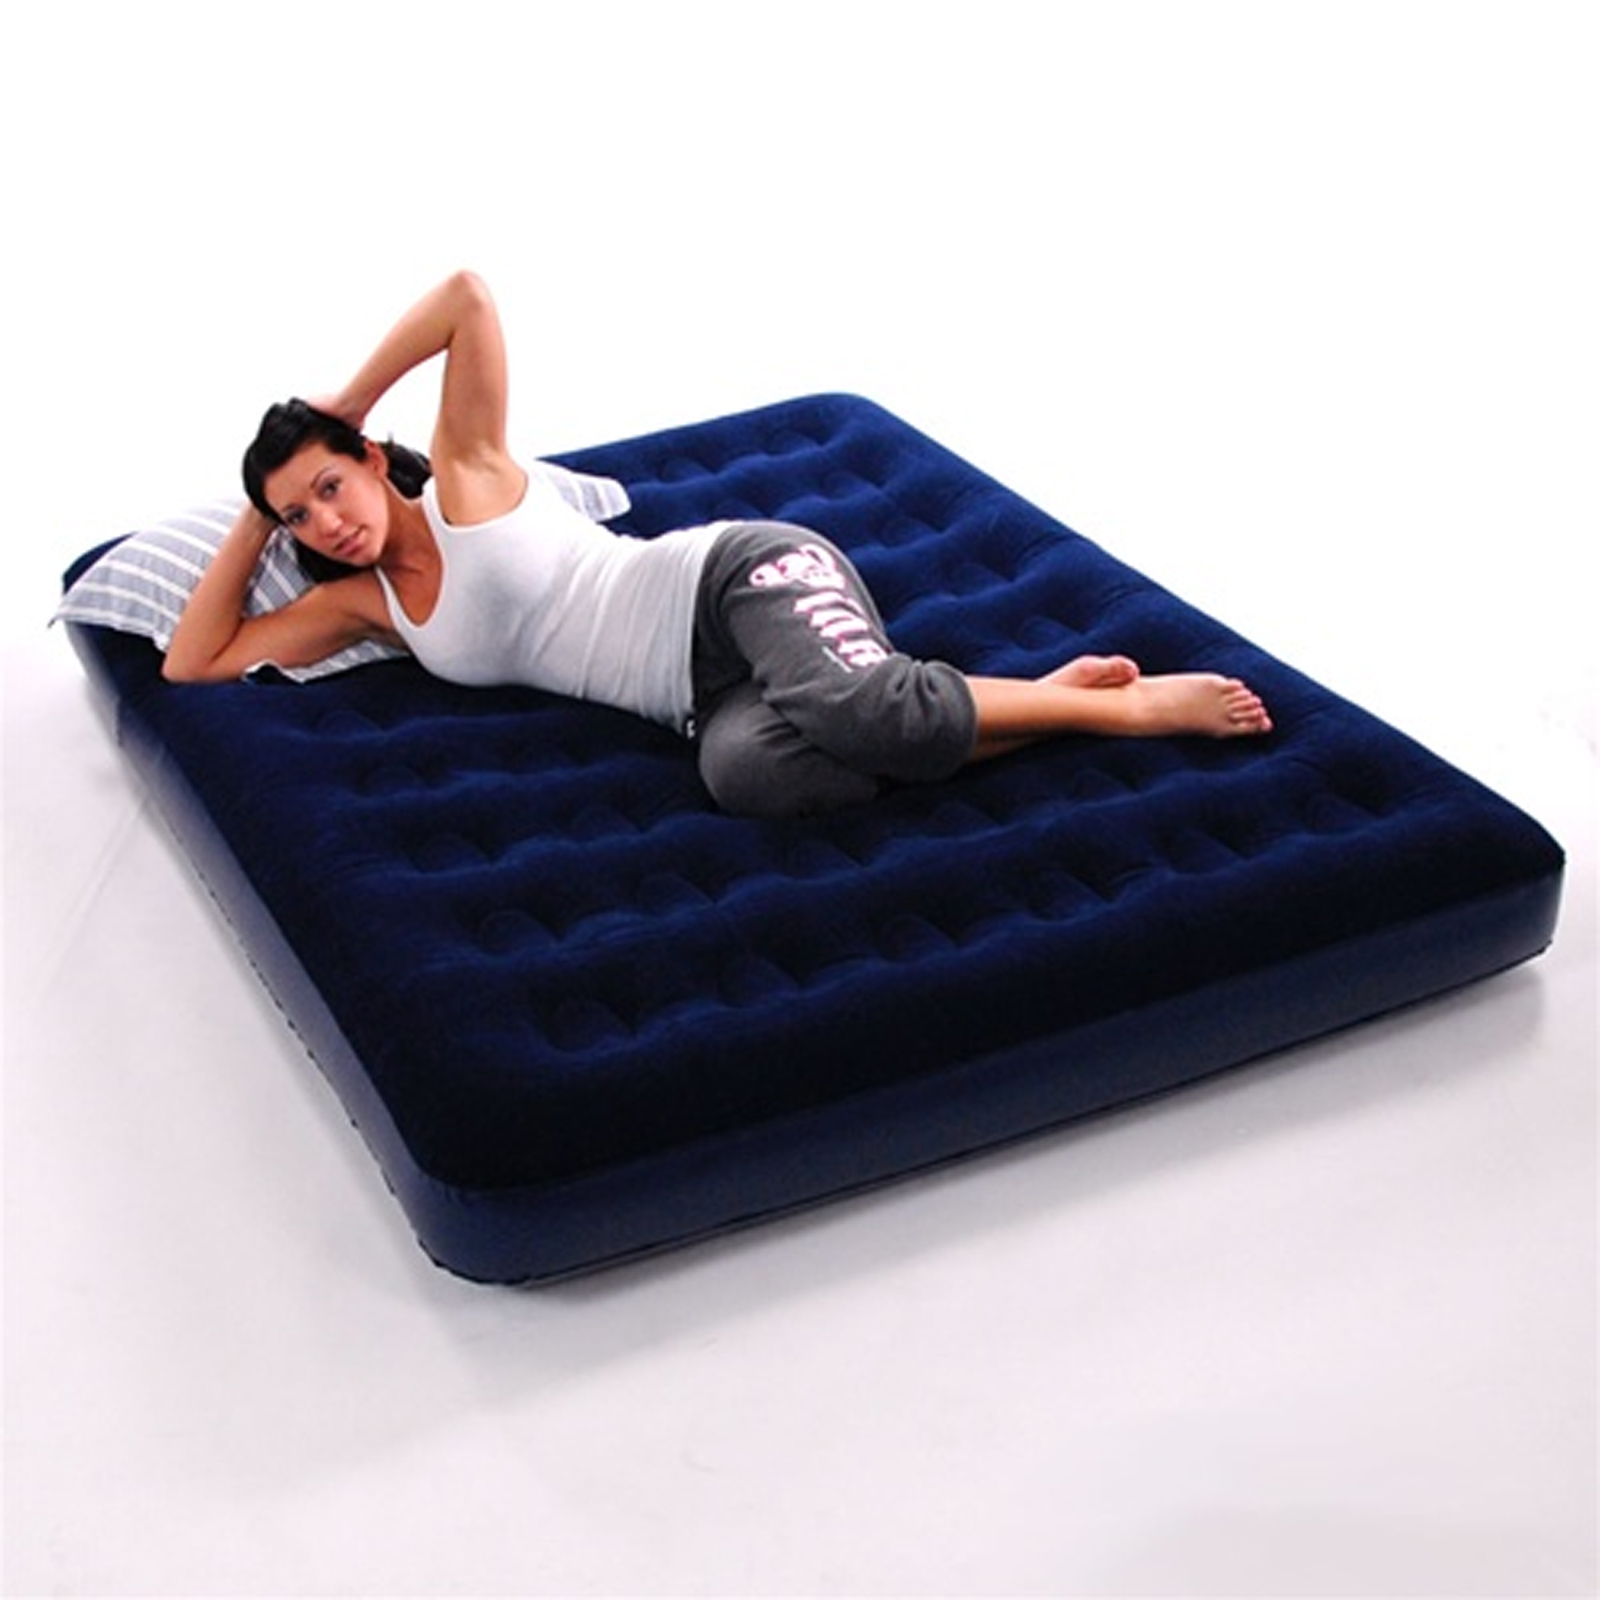 Double Inflatable Flocked Blow Up Air Bed Airbed Guest Camping Mattress eBay